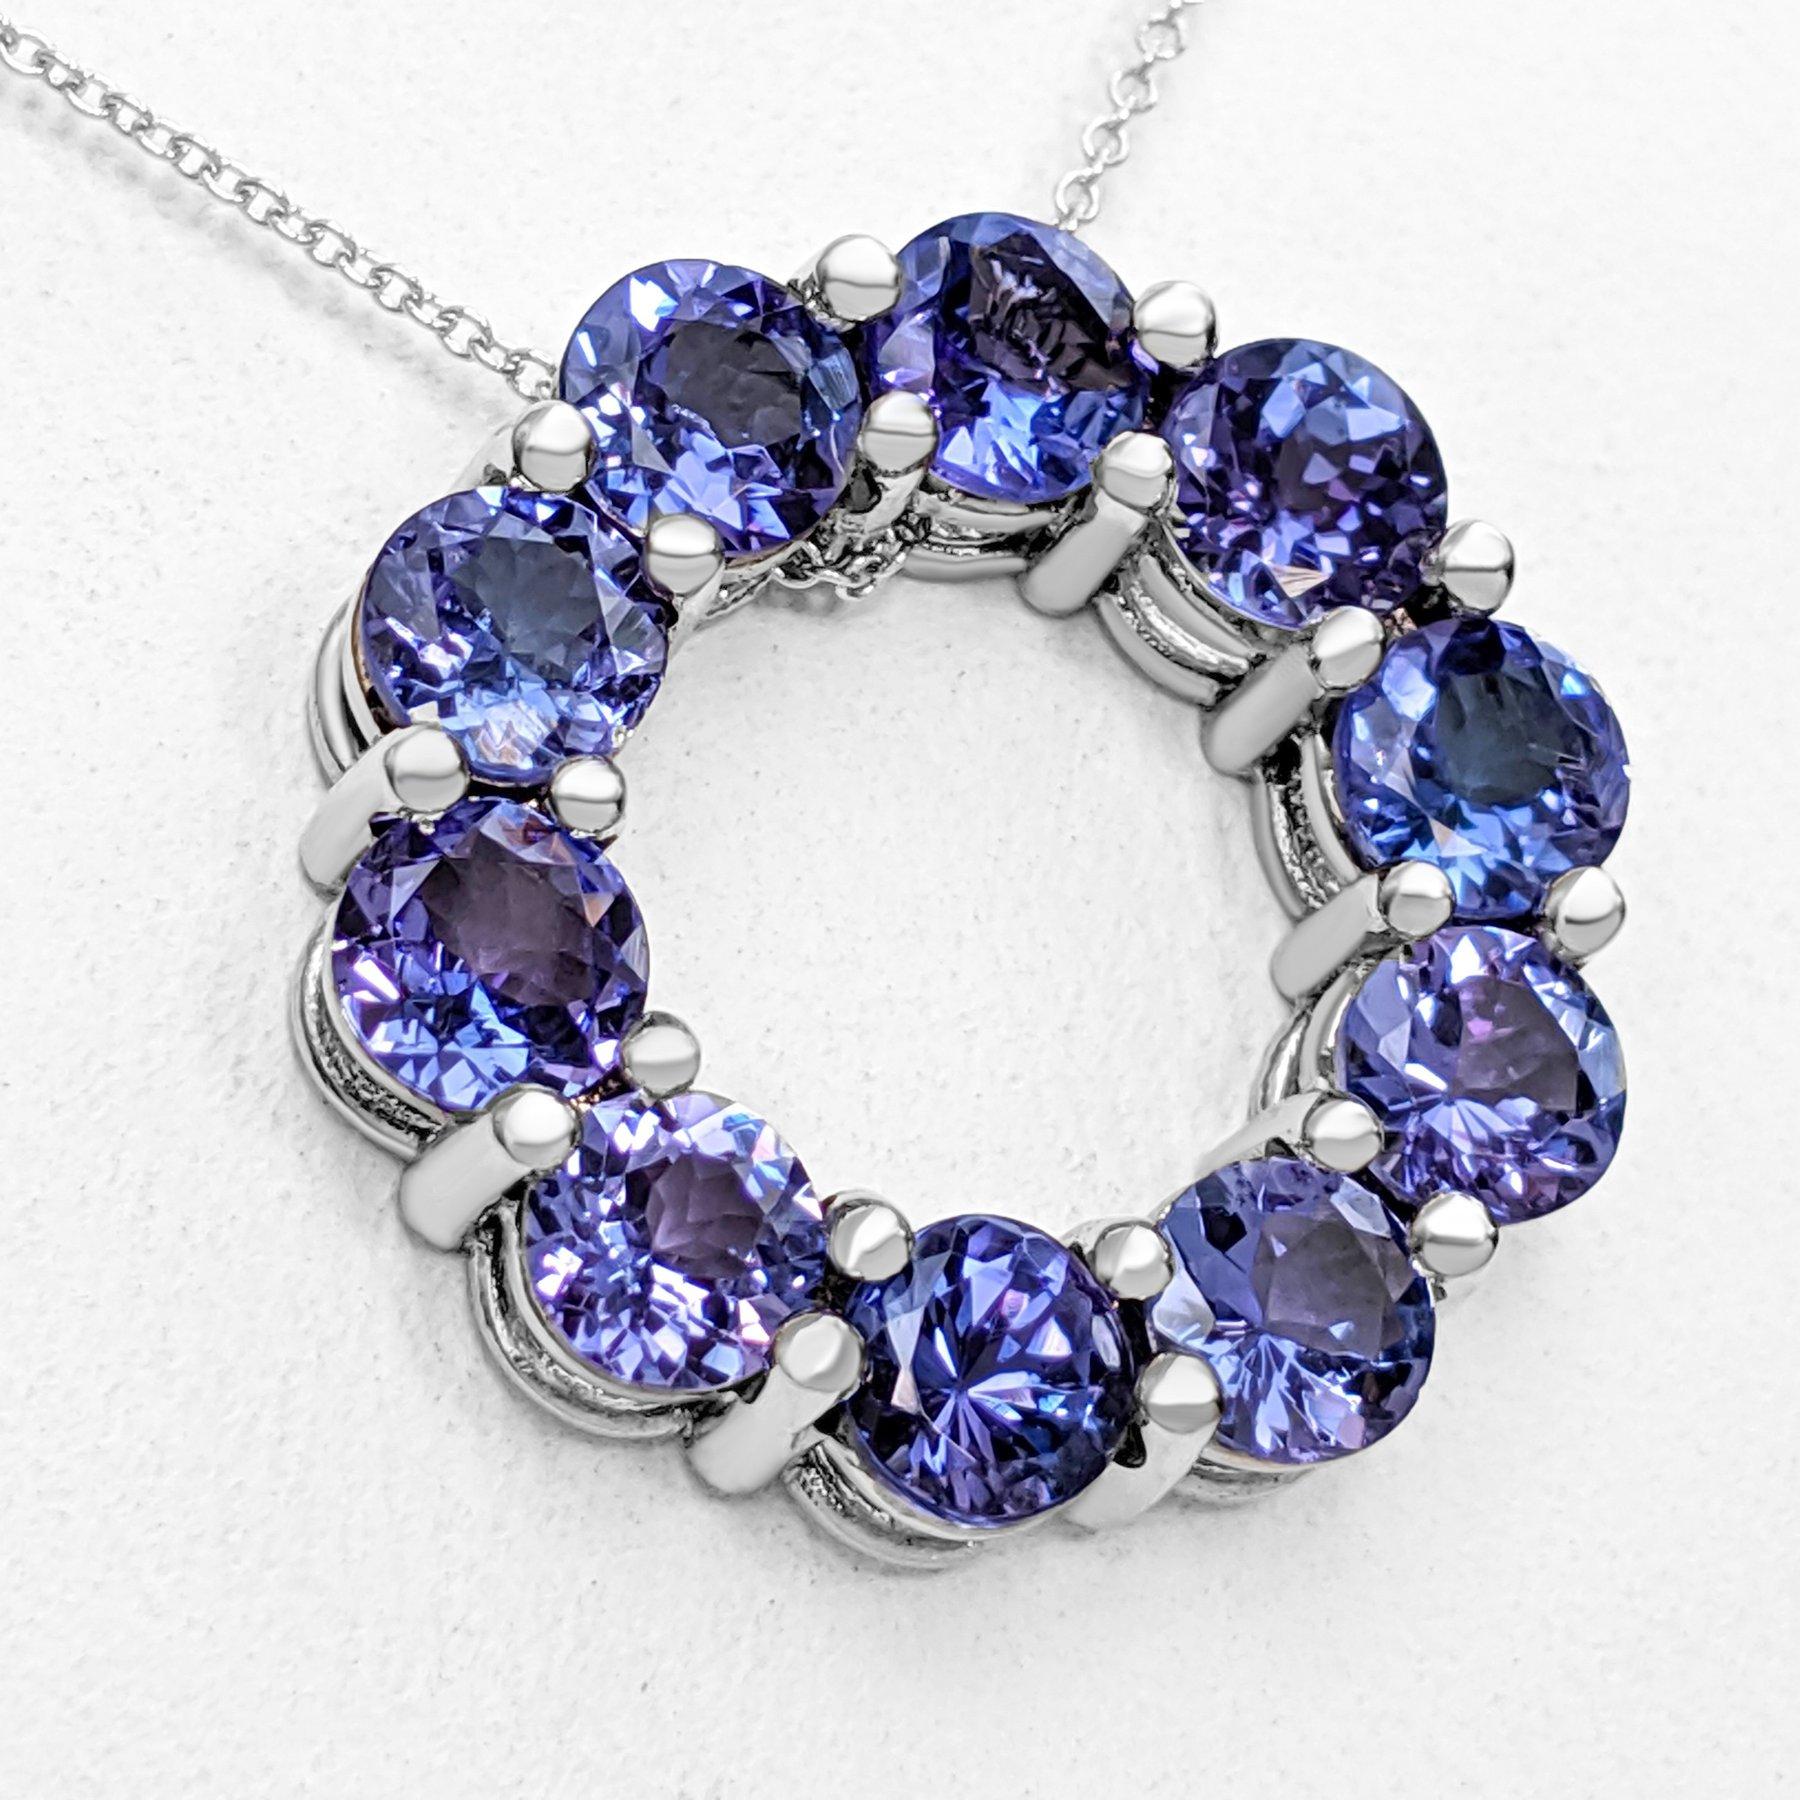 $1 NO RESERVE!   5.23cttw Tanzanite, 14K White Gold Necklace With Pendant 2